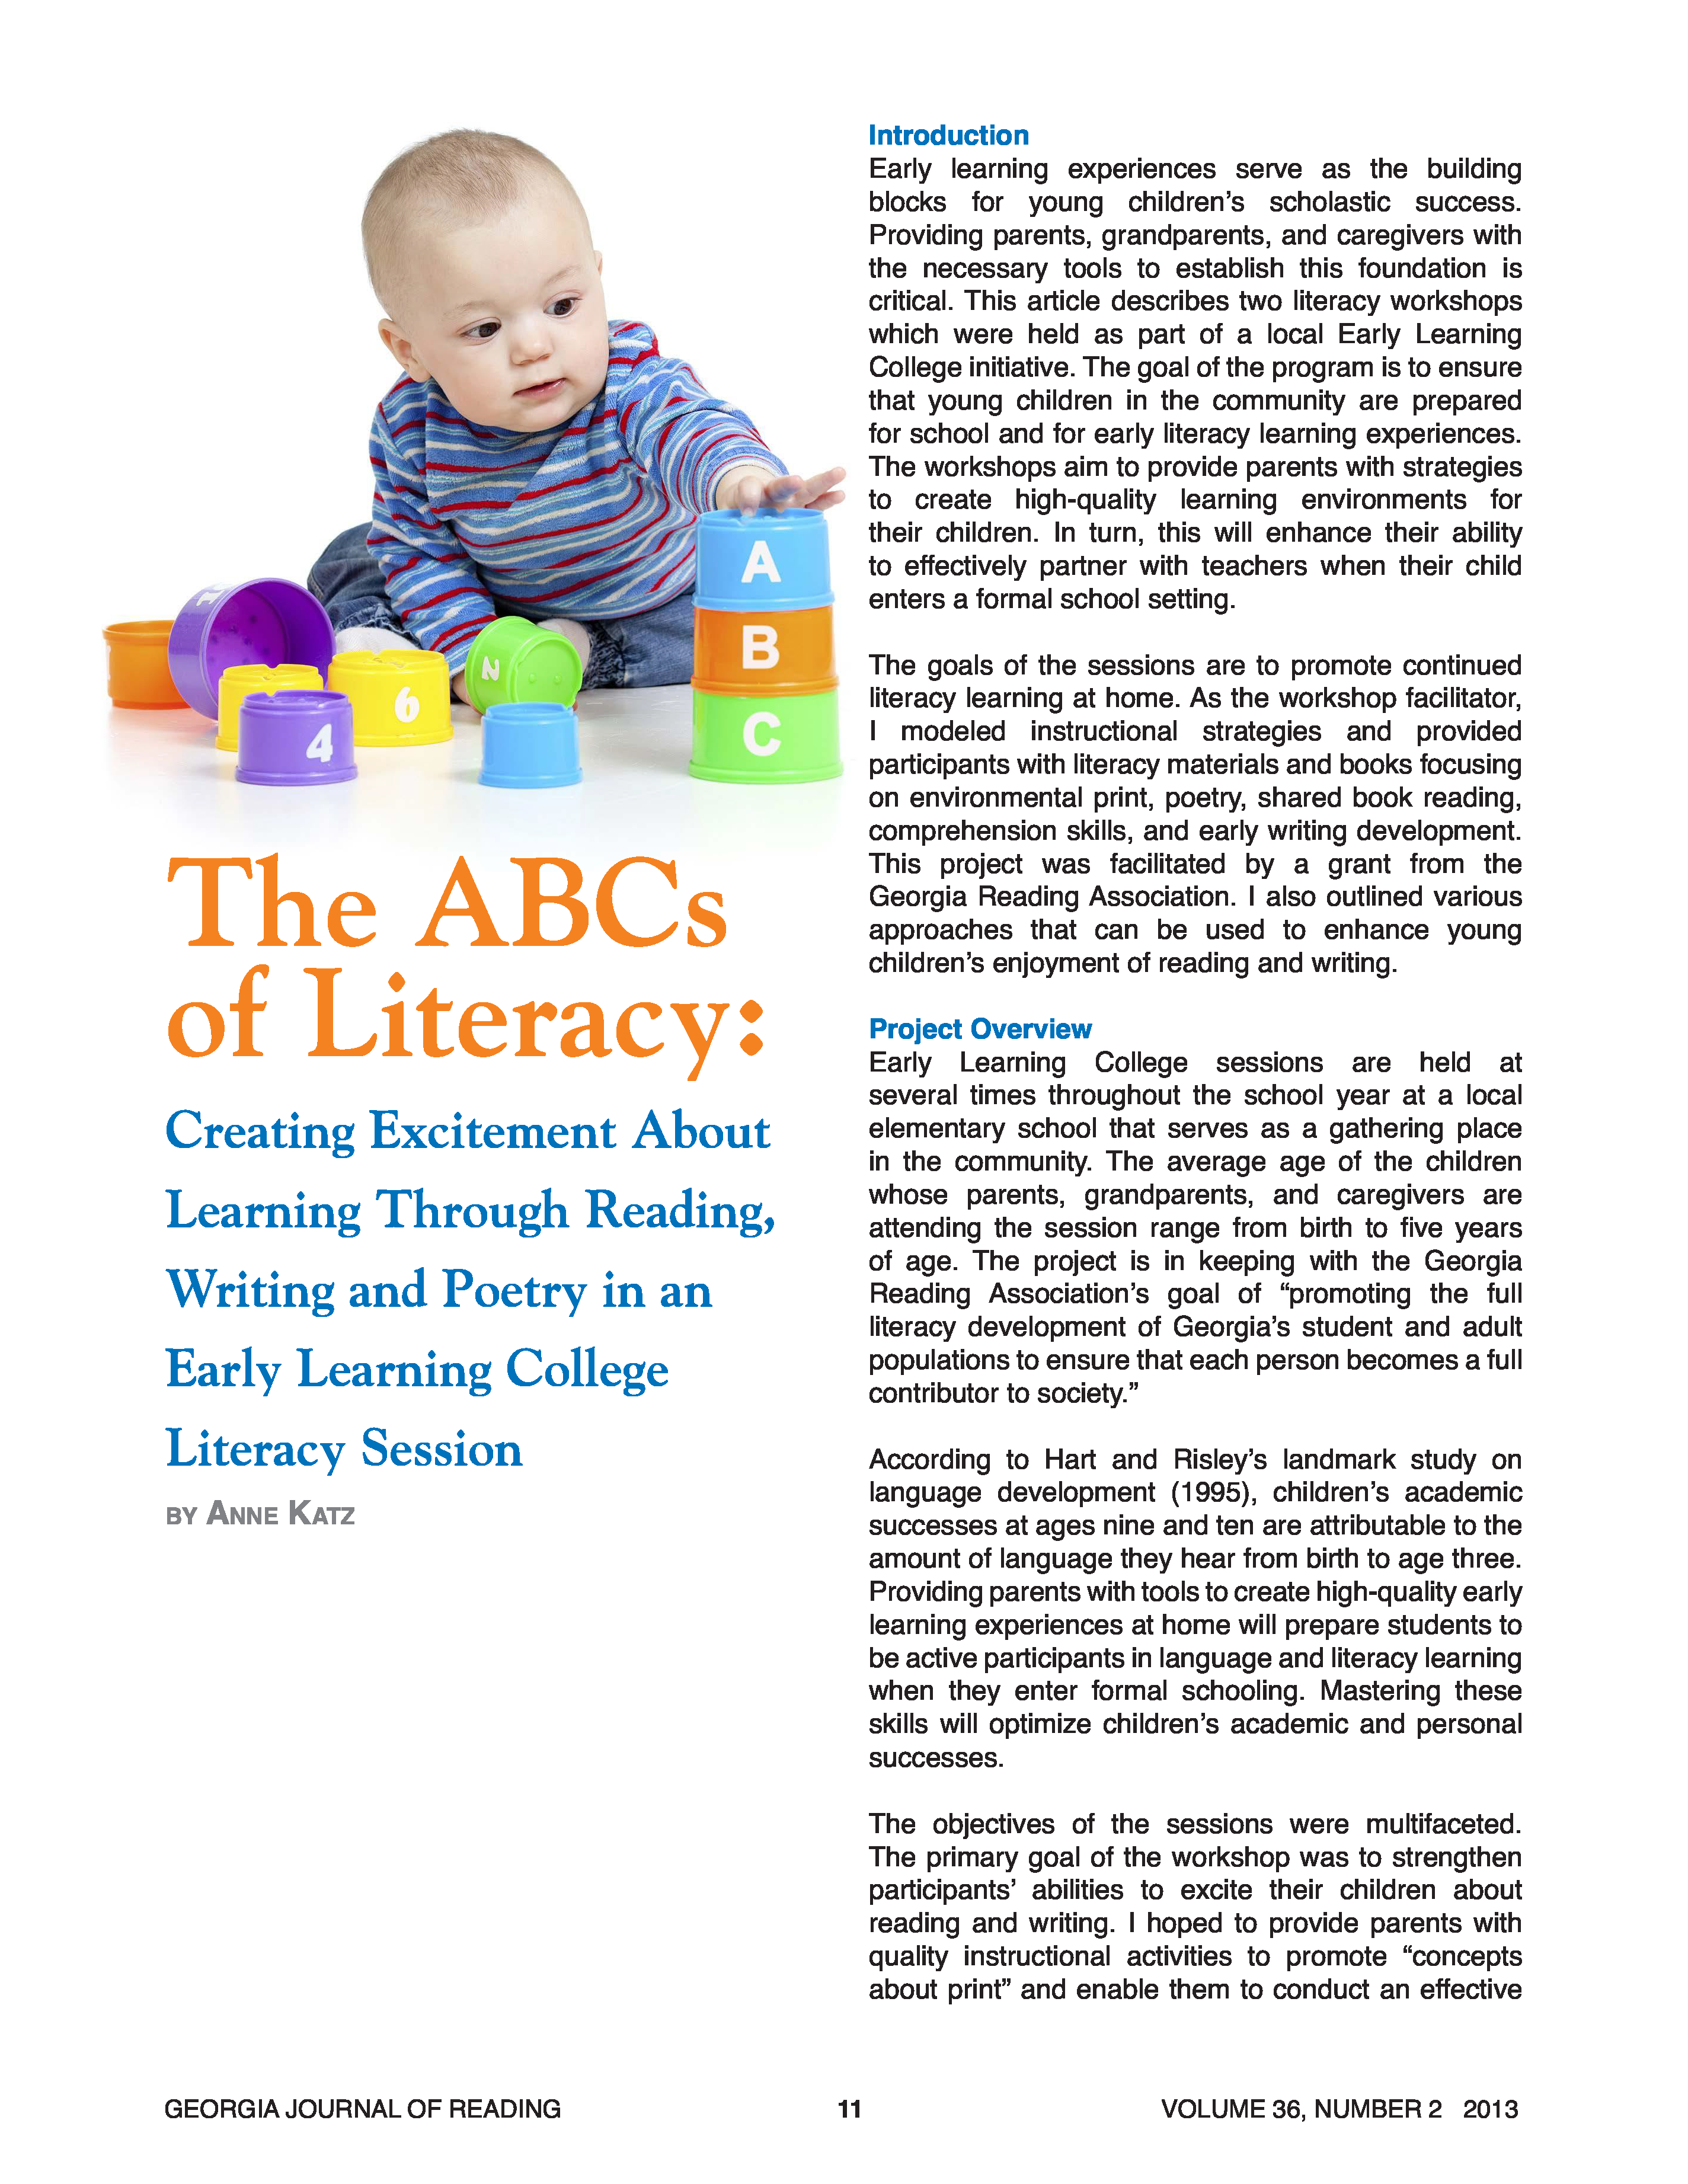 The ABCs of Literacy: Creating Excitement About Learning Through Reading, Writing and Poetry in an Early Learning College Literacy Session